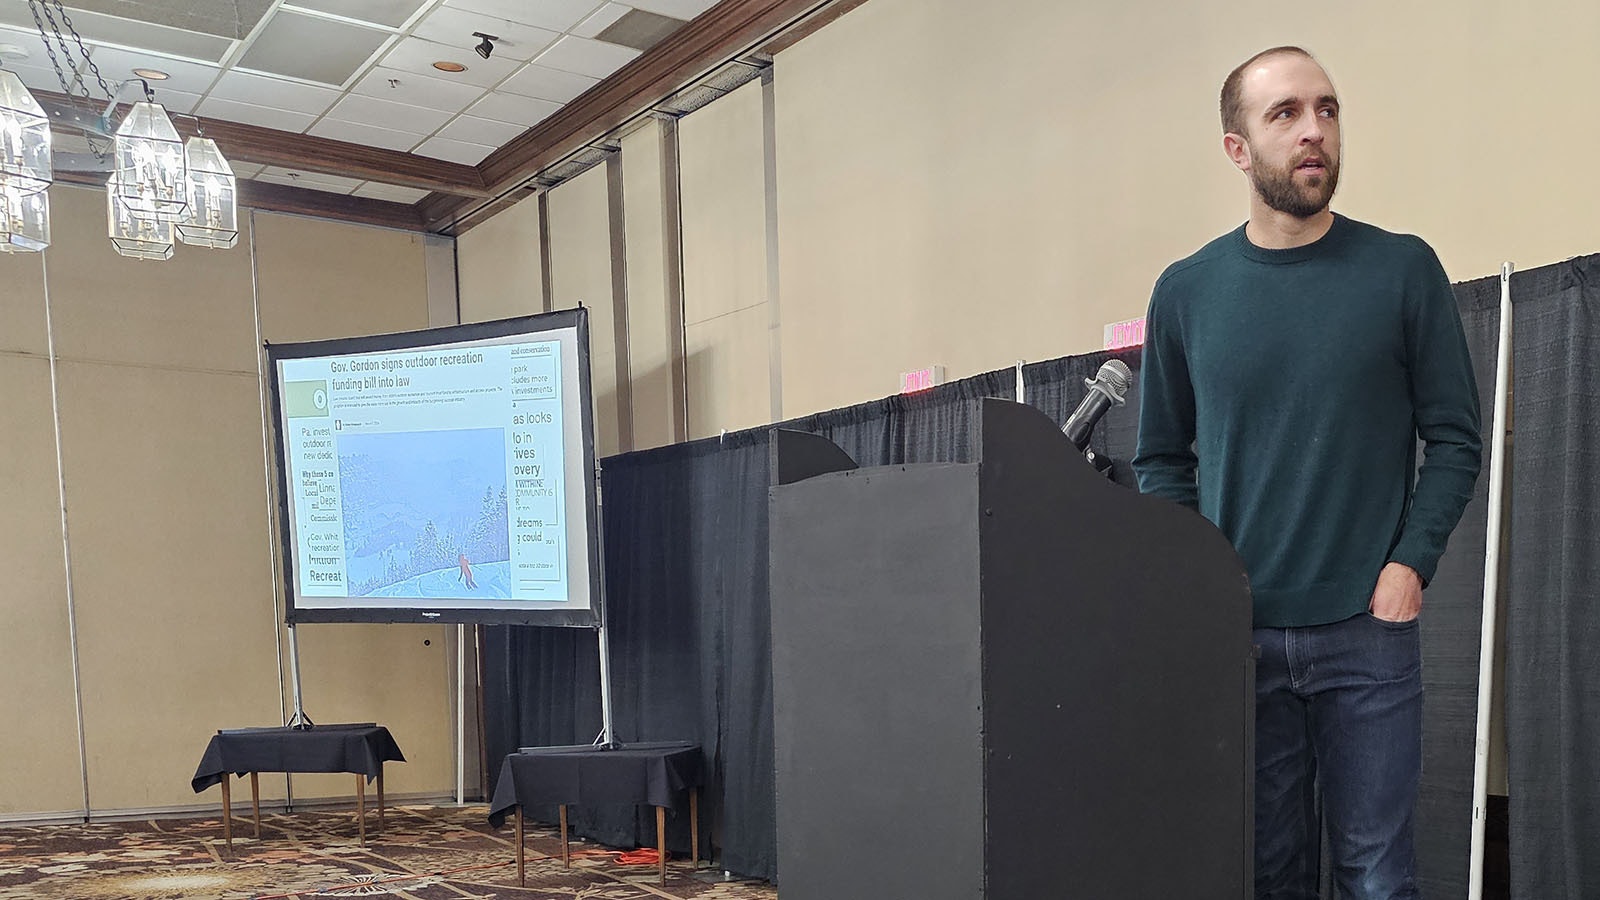 Chris Perkins with national think tank Outdoor Recreation Roundtable was a keynote speaker during the Wyoming Outdoor Summit in Casper this week.